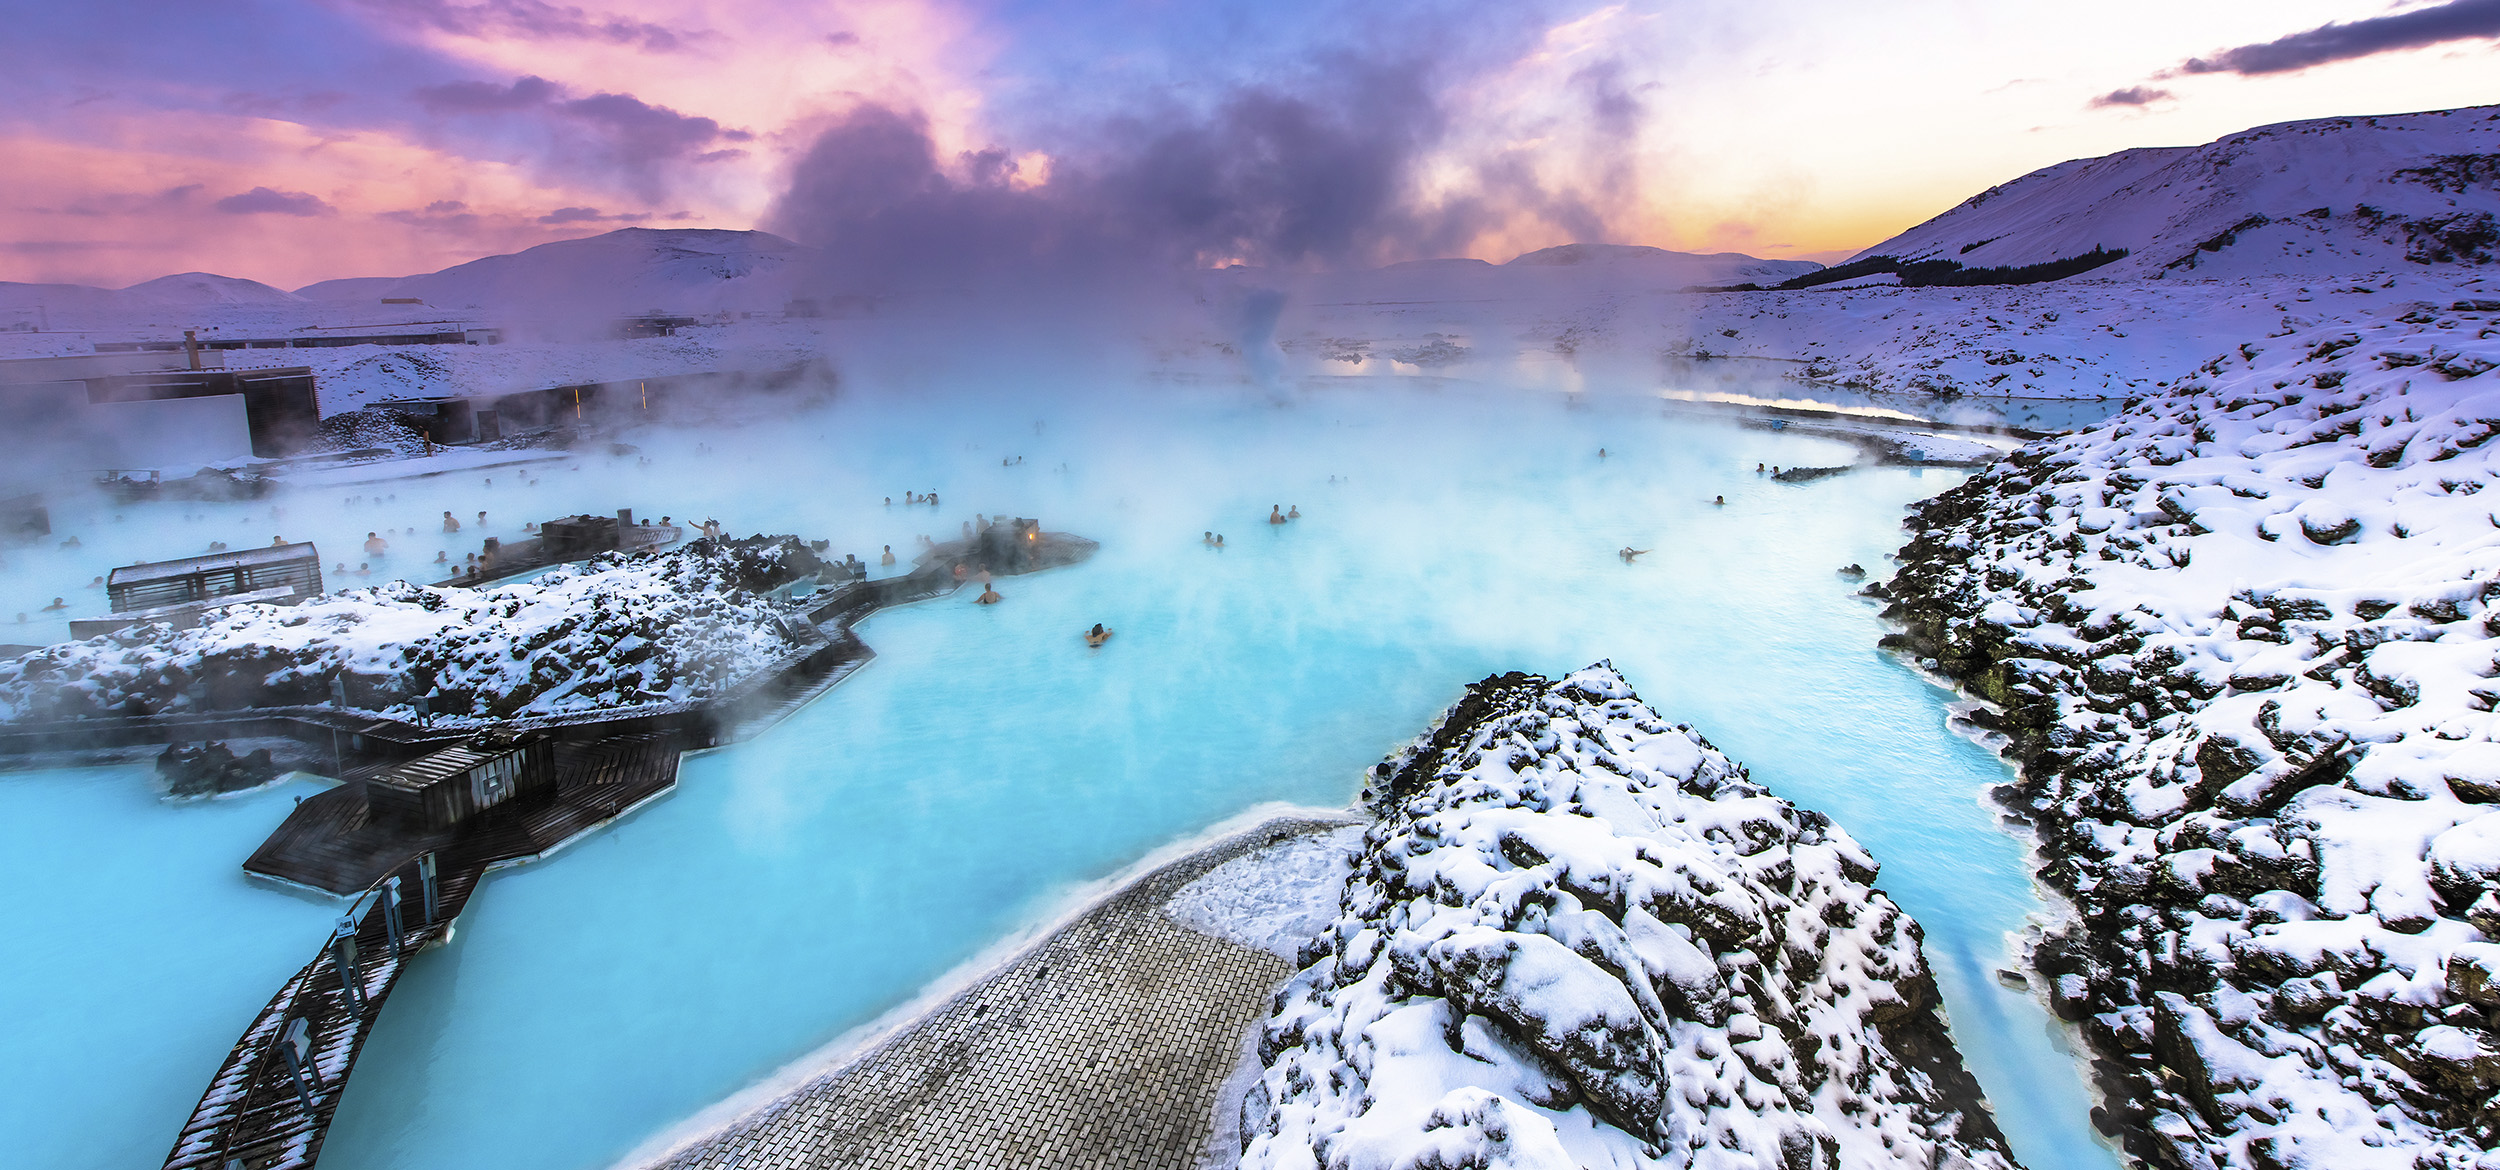 Steam rises from the Blue Lagoon hot springs in Iceland. 